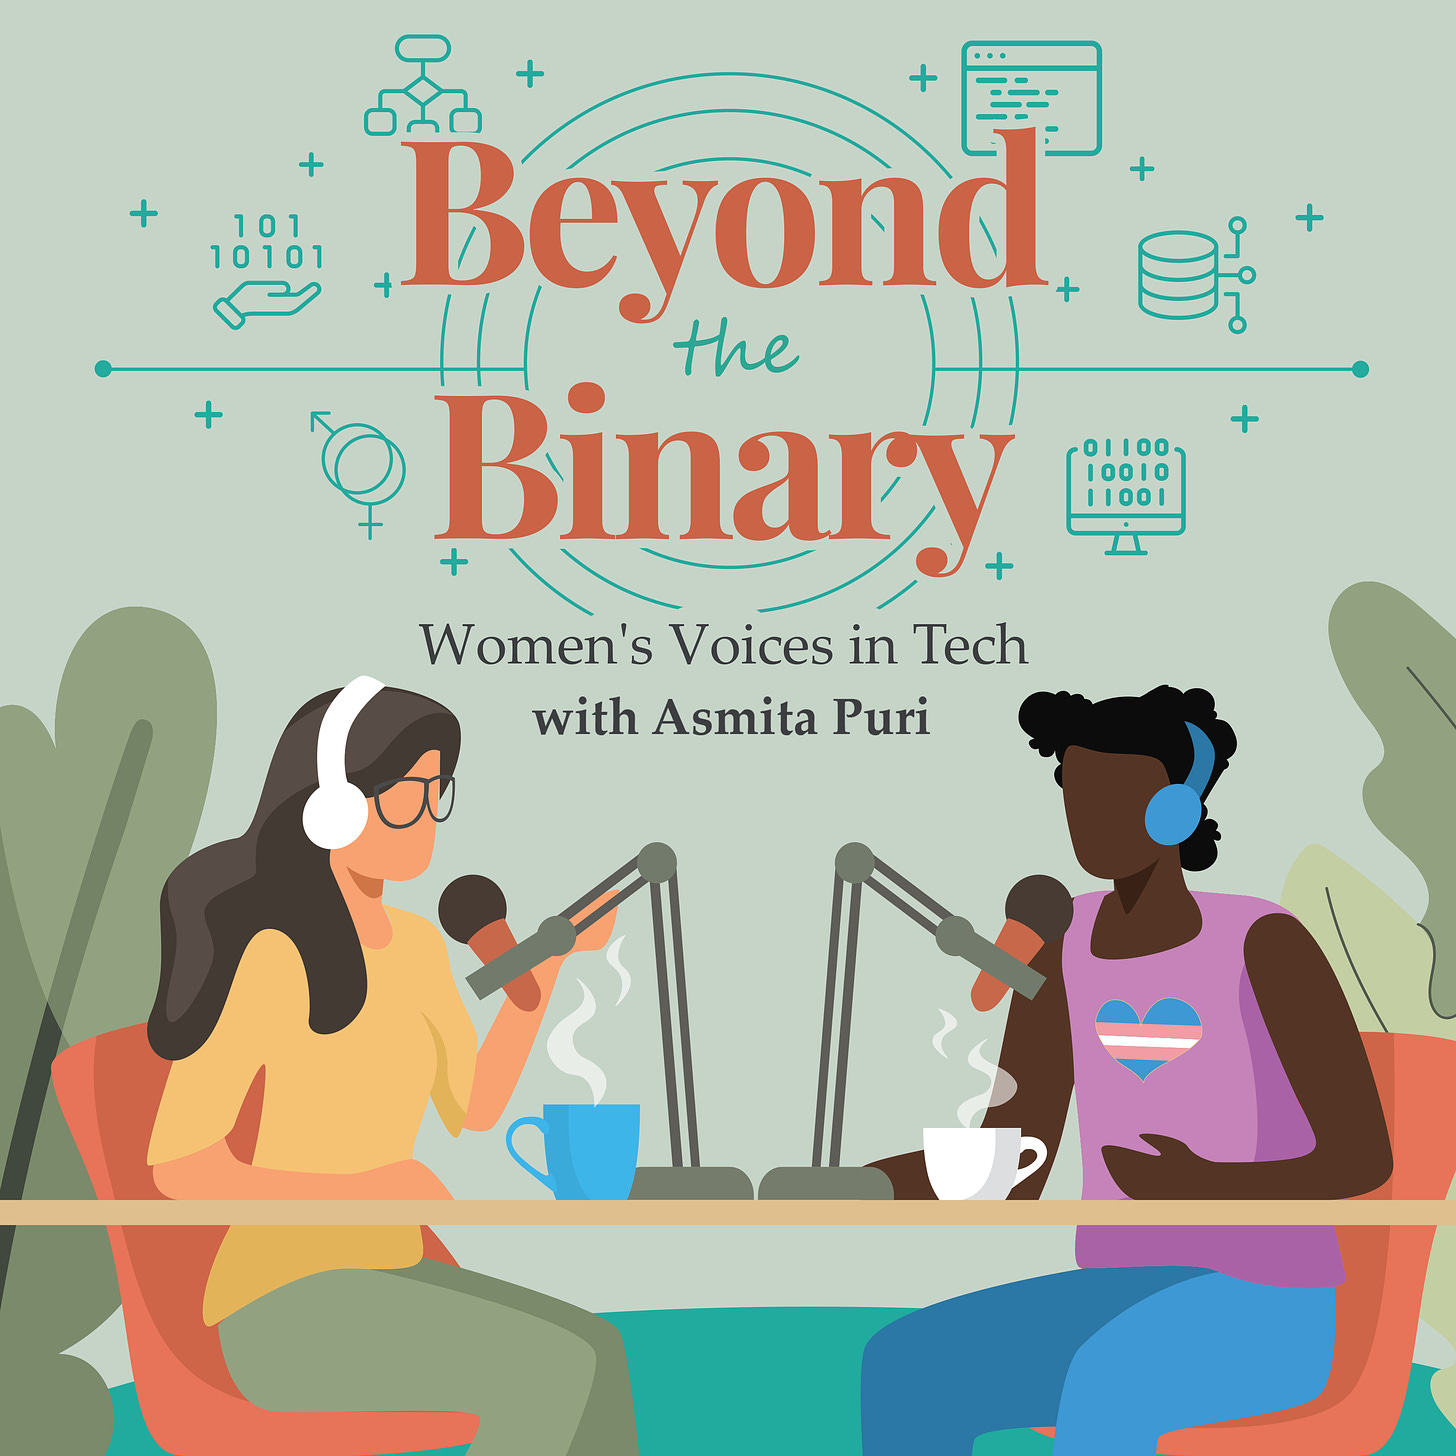 Two people sitting across from each other with a hot beverage, talking into a microphone. They are surrounded by plants and the caption reads: "Beyond the Binary: Women's voices in Tech with Asmita Puri"